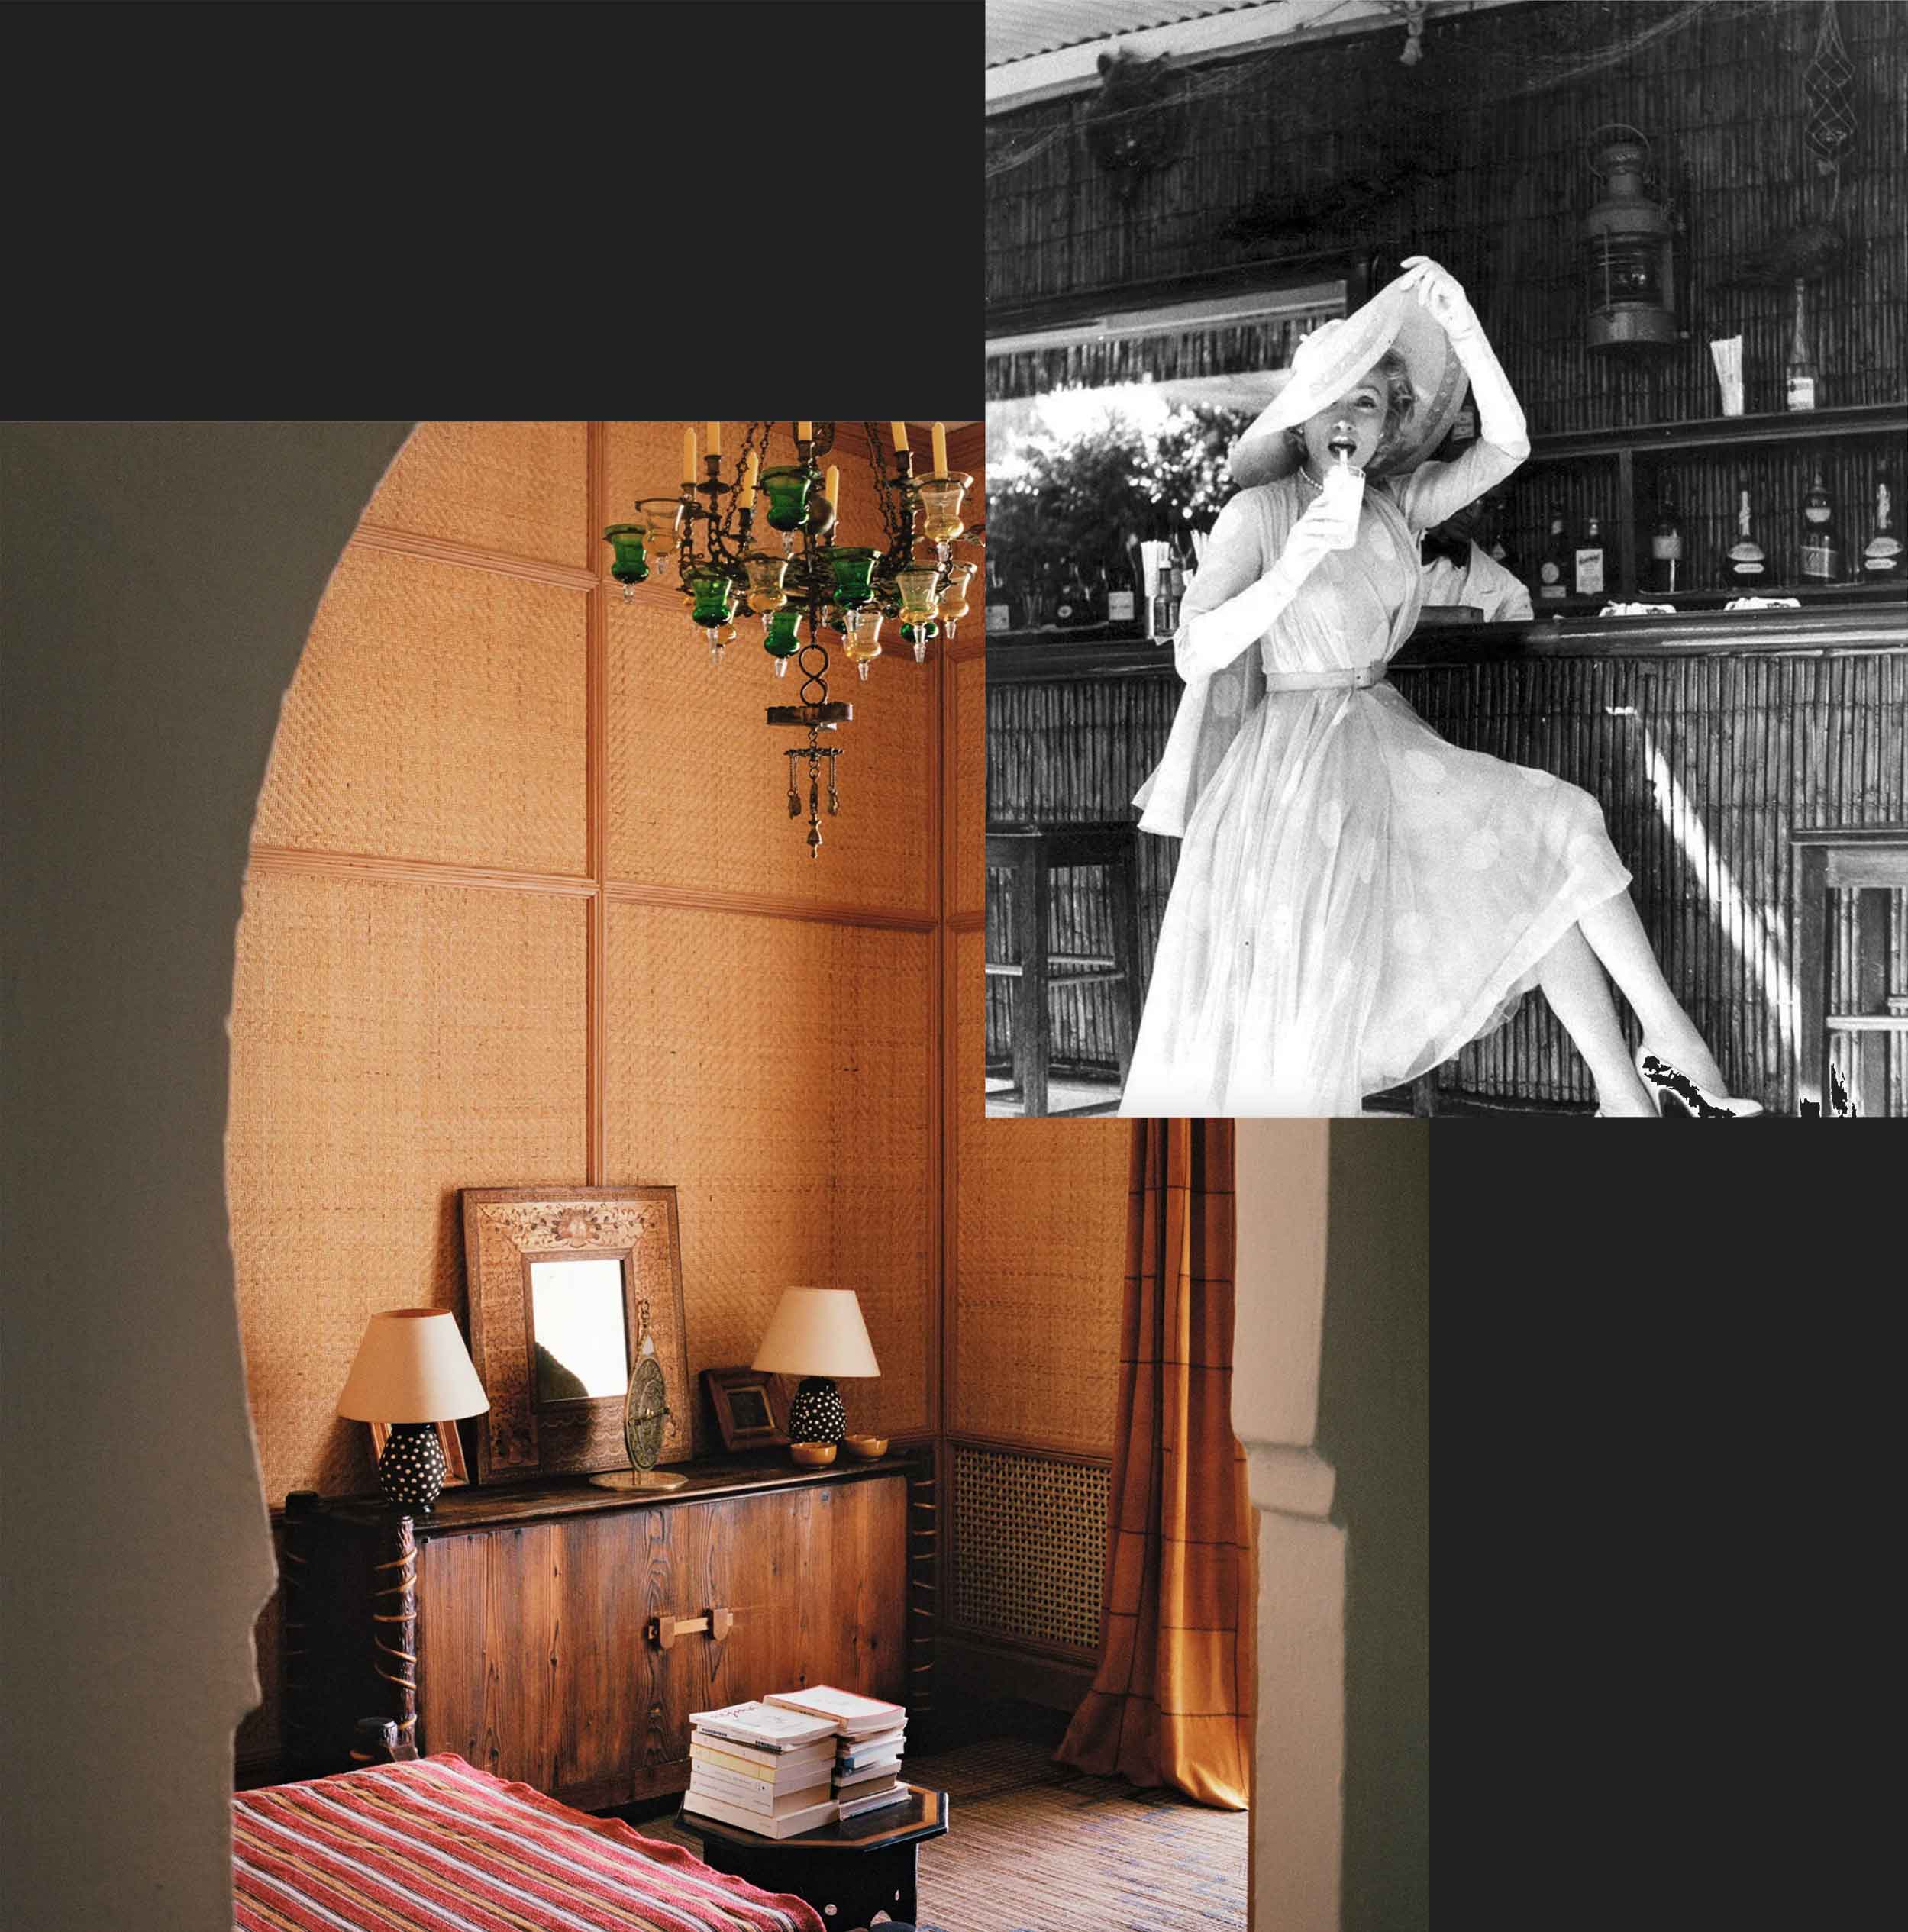 Collage with two photographs: black and white image of woman in white dress at a bar, and a warm color bedroom interior with wicker walls